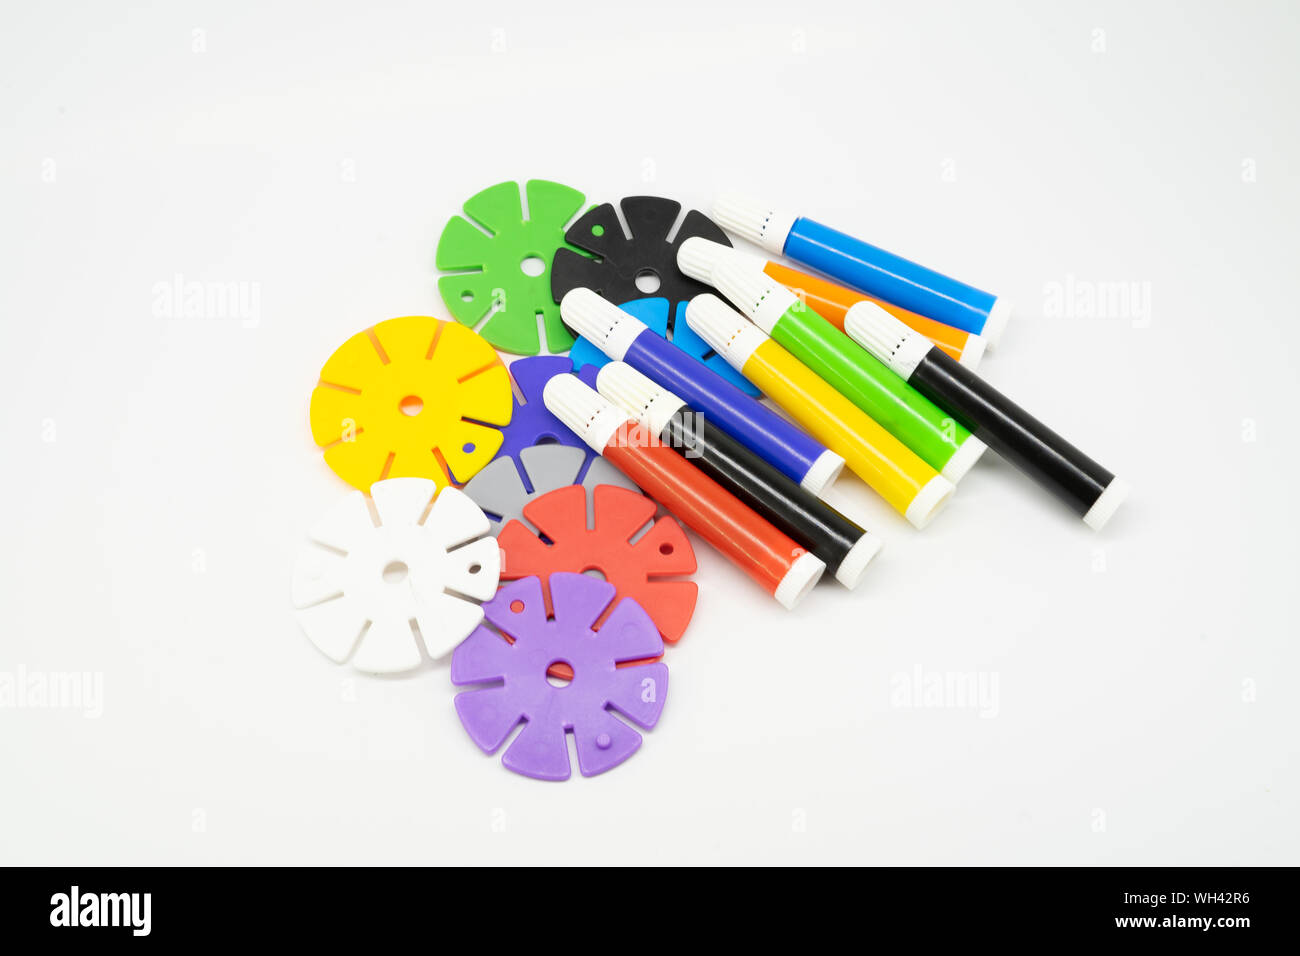 School supplies, stationery on white background - space for caption Stock Photo